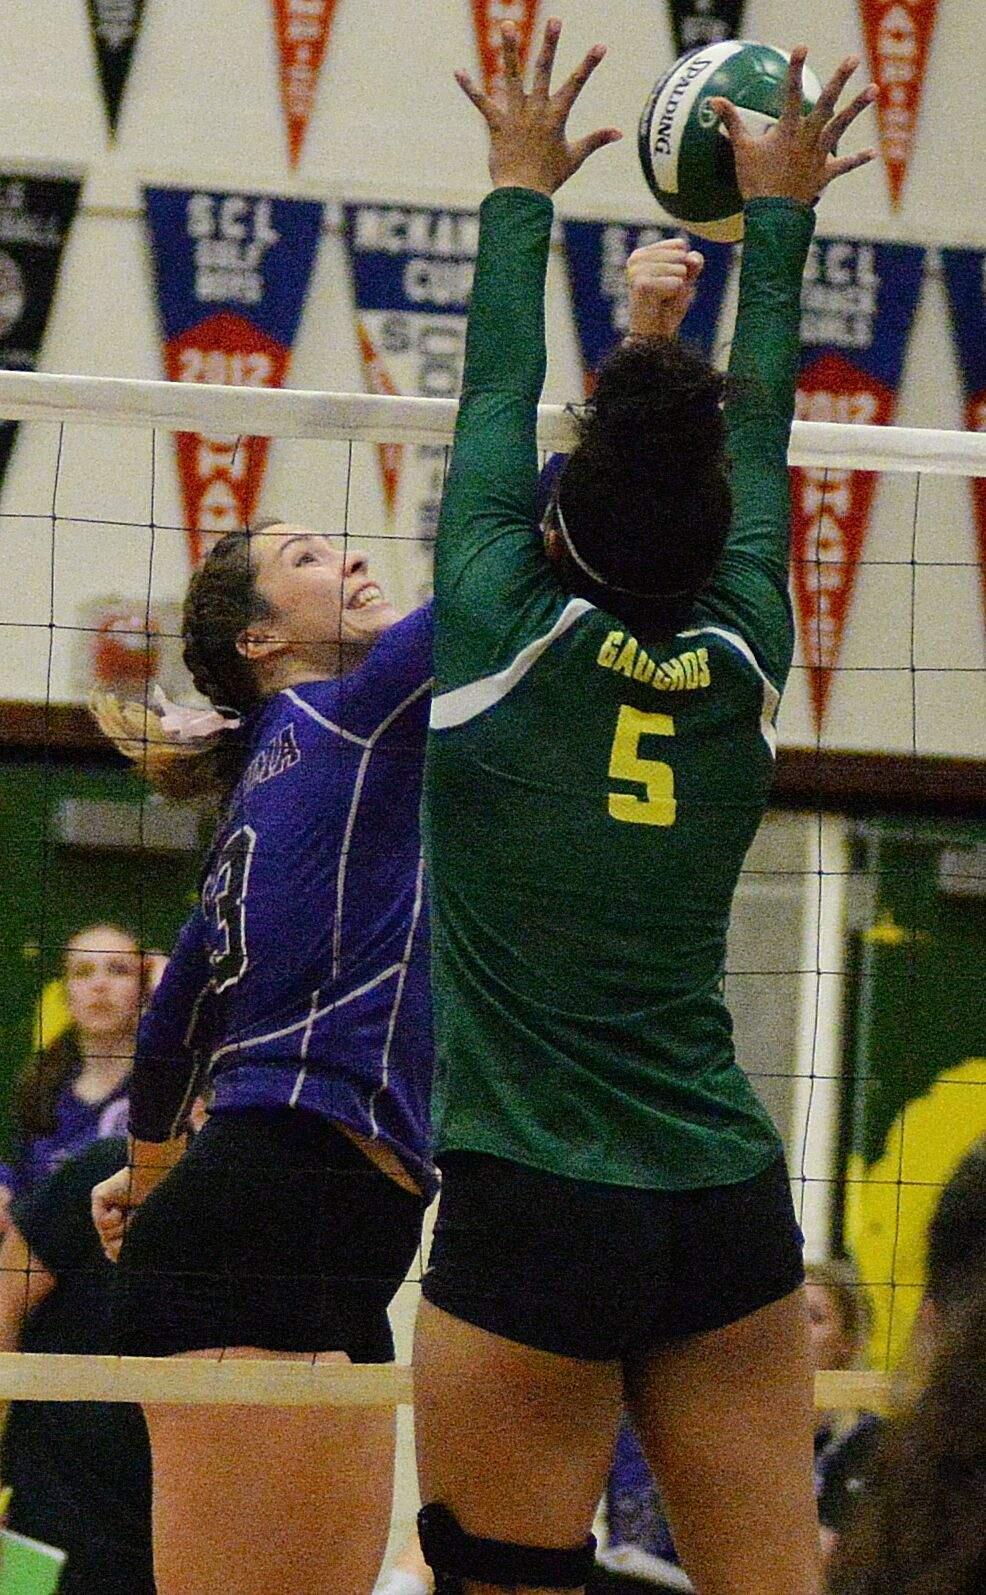 Casa Grande's Simone Wright blocks a punch attempt by Petaluma's Emma Weiand. (SUMNER FOWLER / FOR THE ARGUS-COURIER)